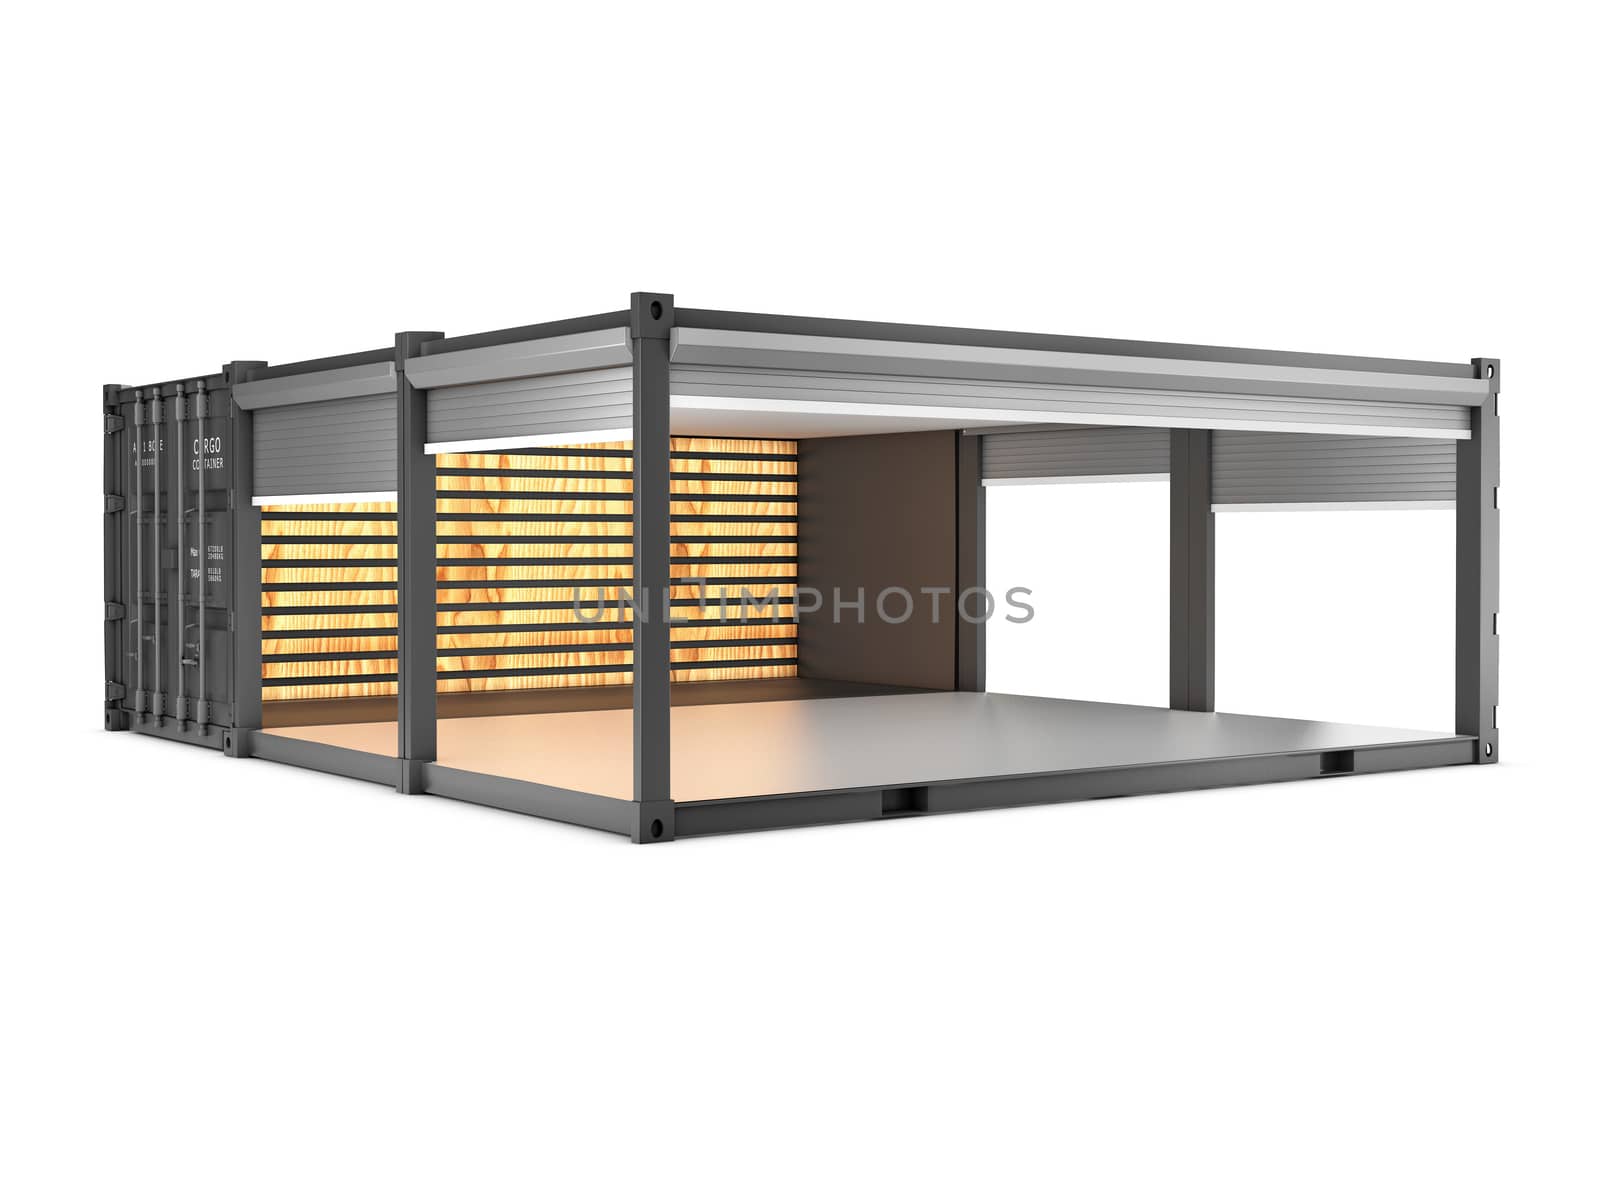 Converted old shipping container into cafe, 3d Illustration isolated gray by tussik